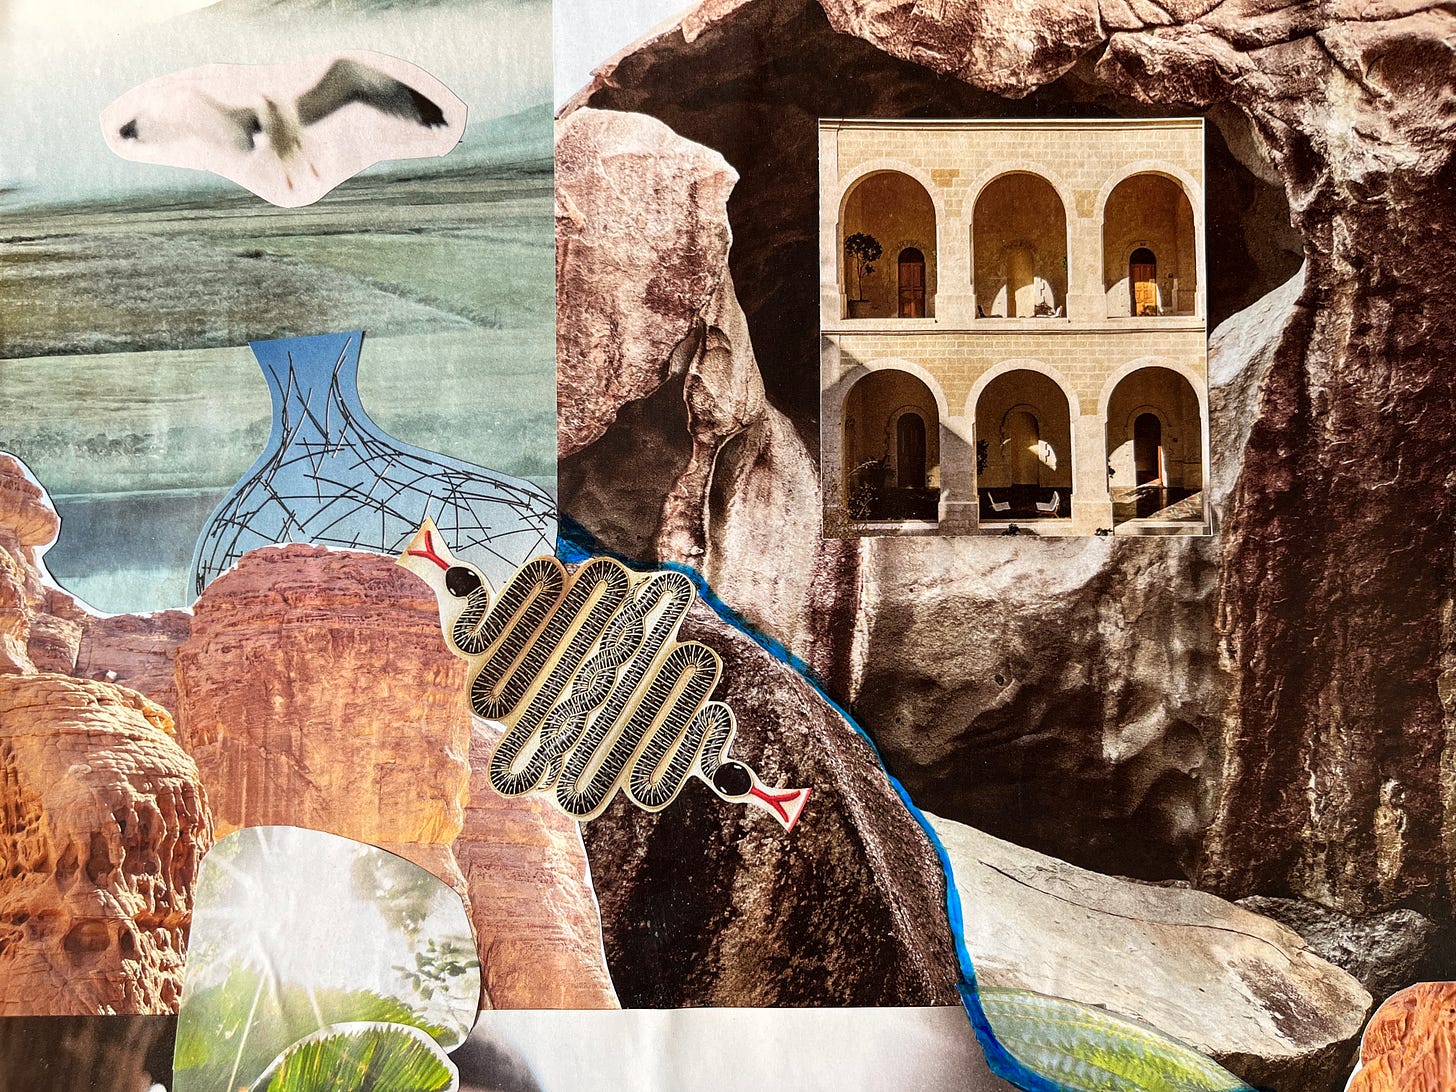 a portion of this years collage, featuring mountainous rock, a blurry seagull, two snakes linked and a row of arched doorways